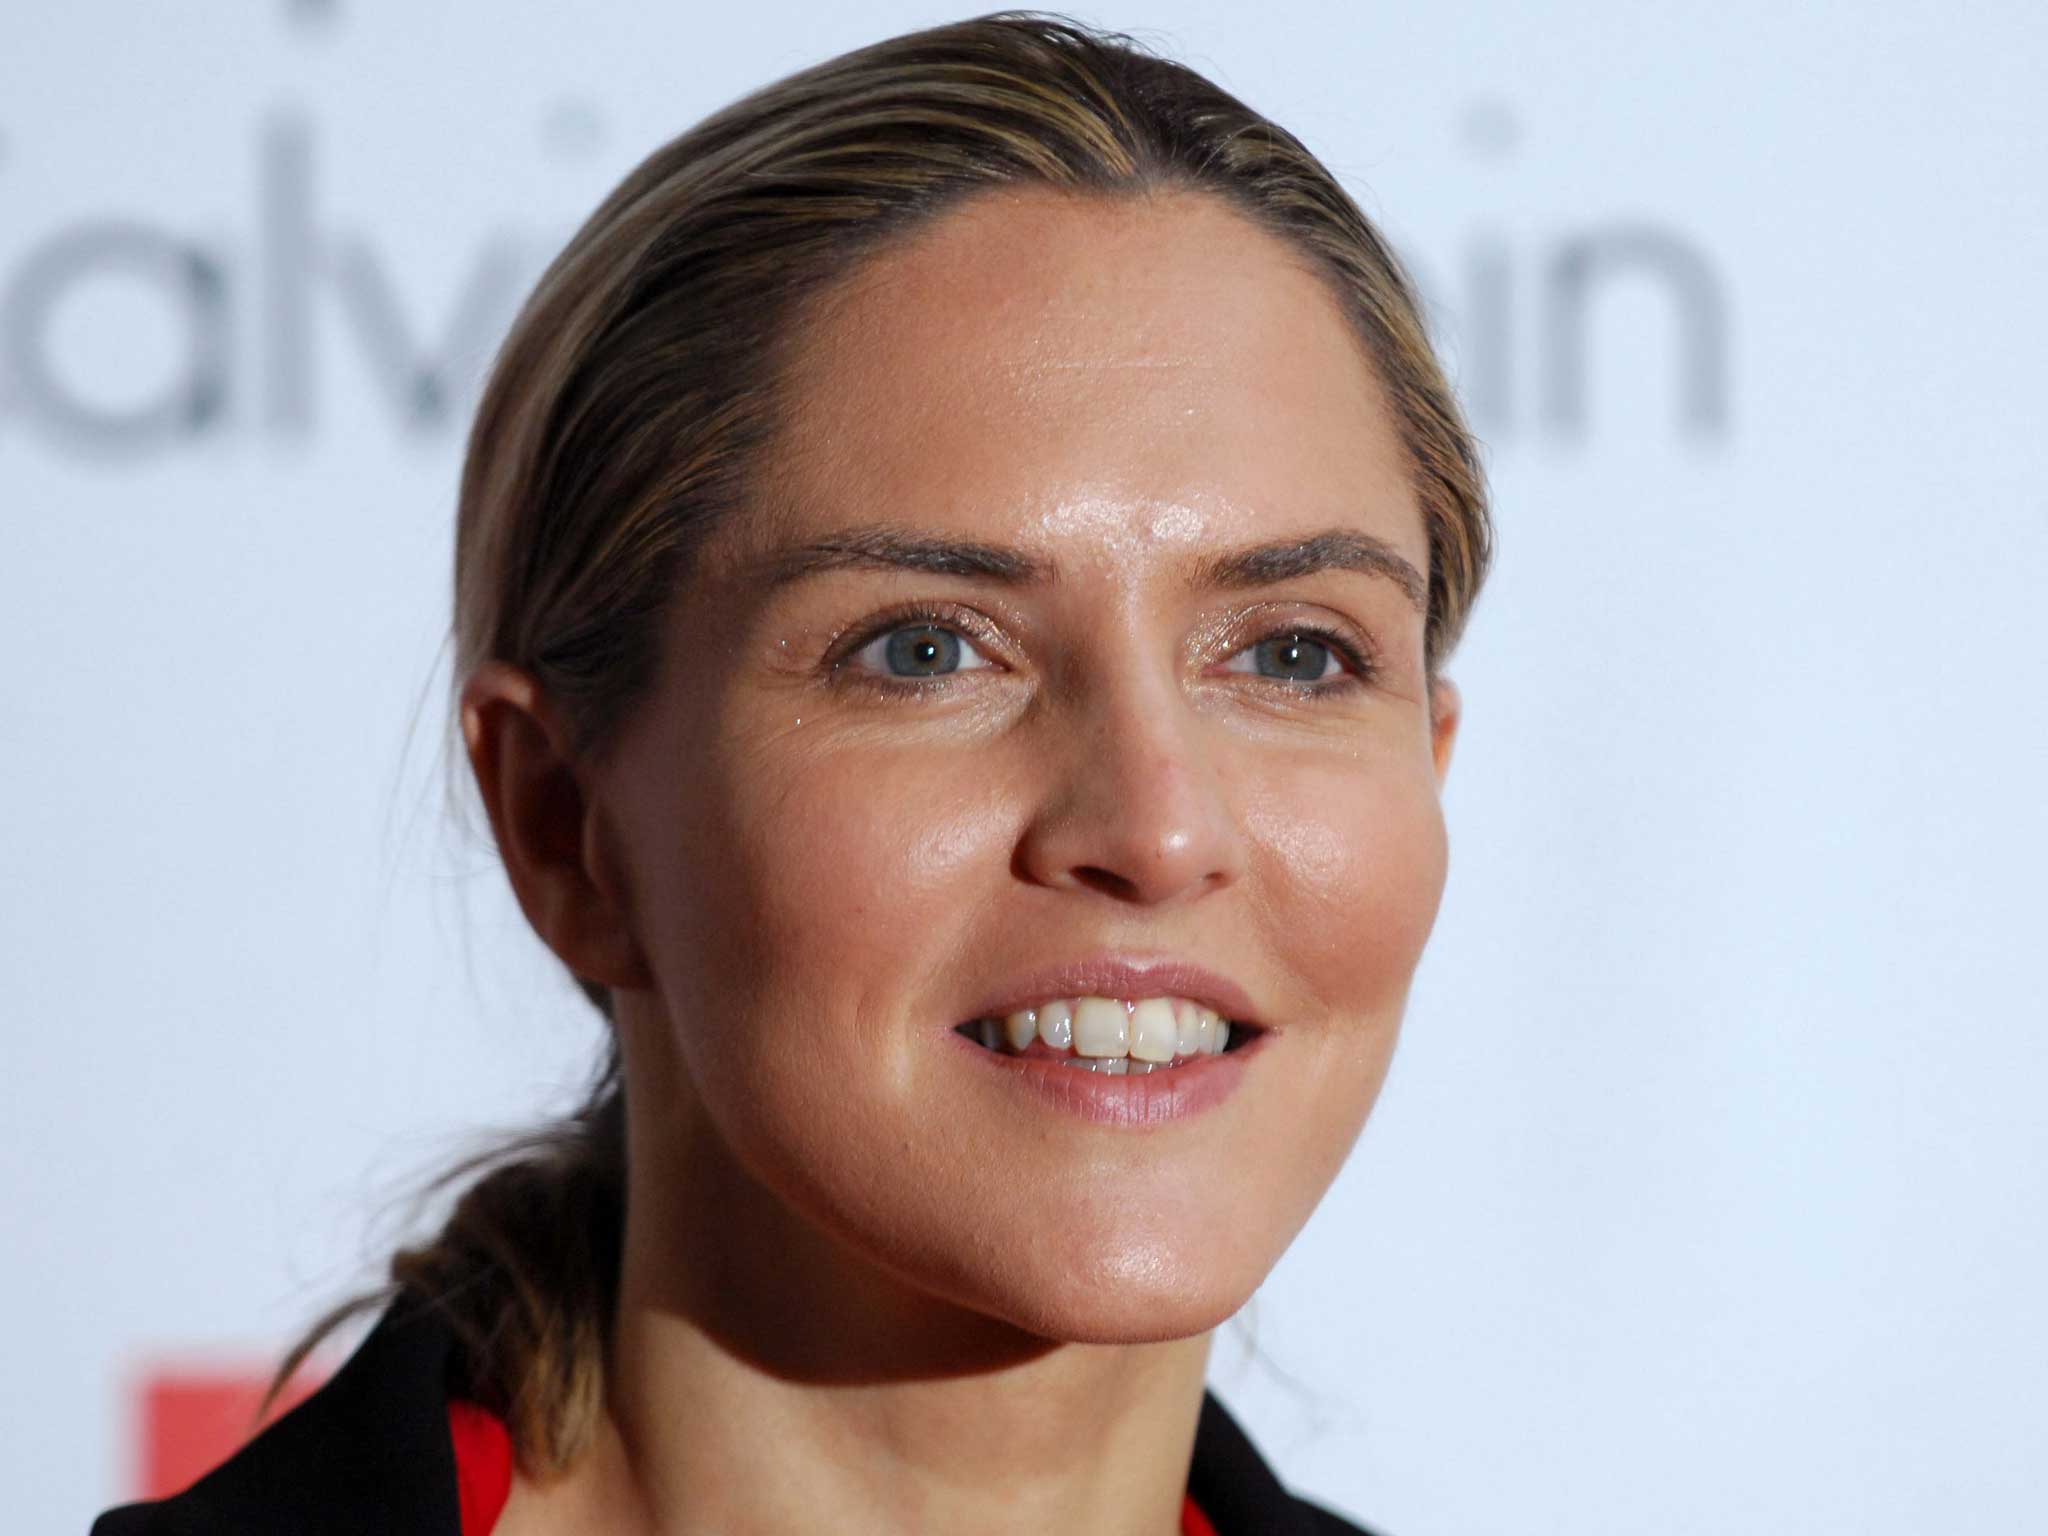 Louise Mensch has courted Twitter controversy yet again